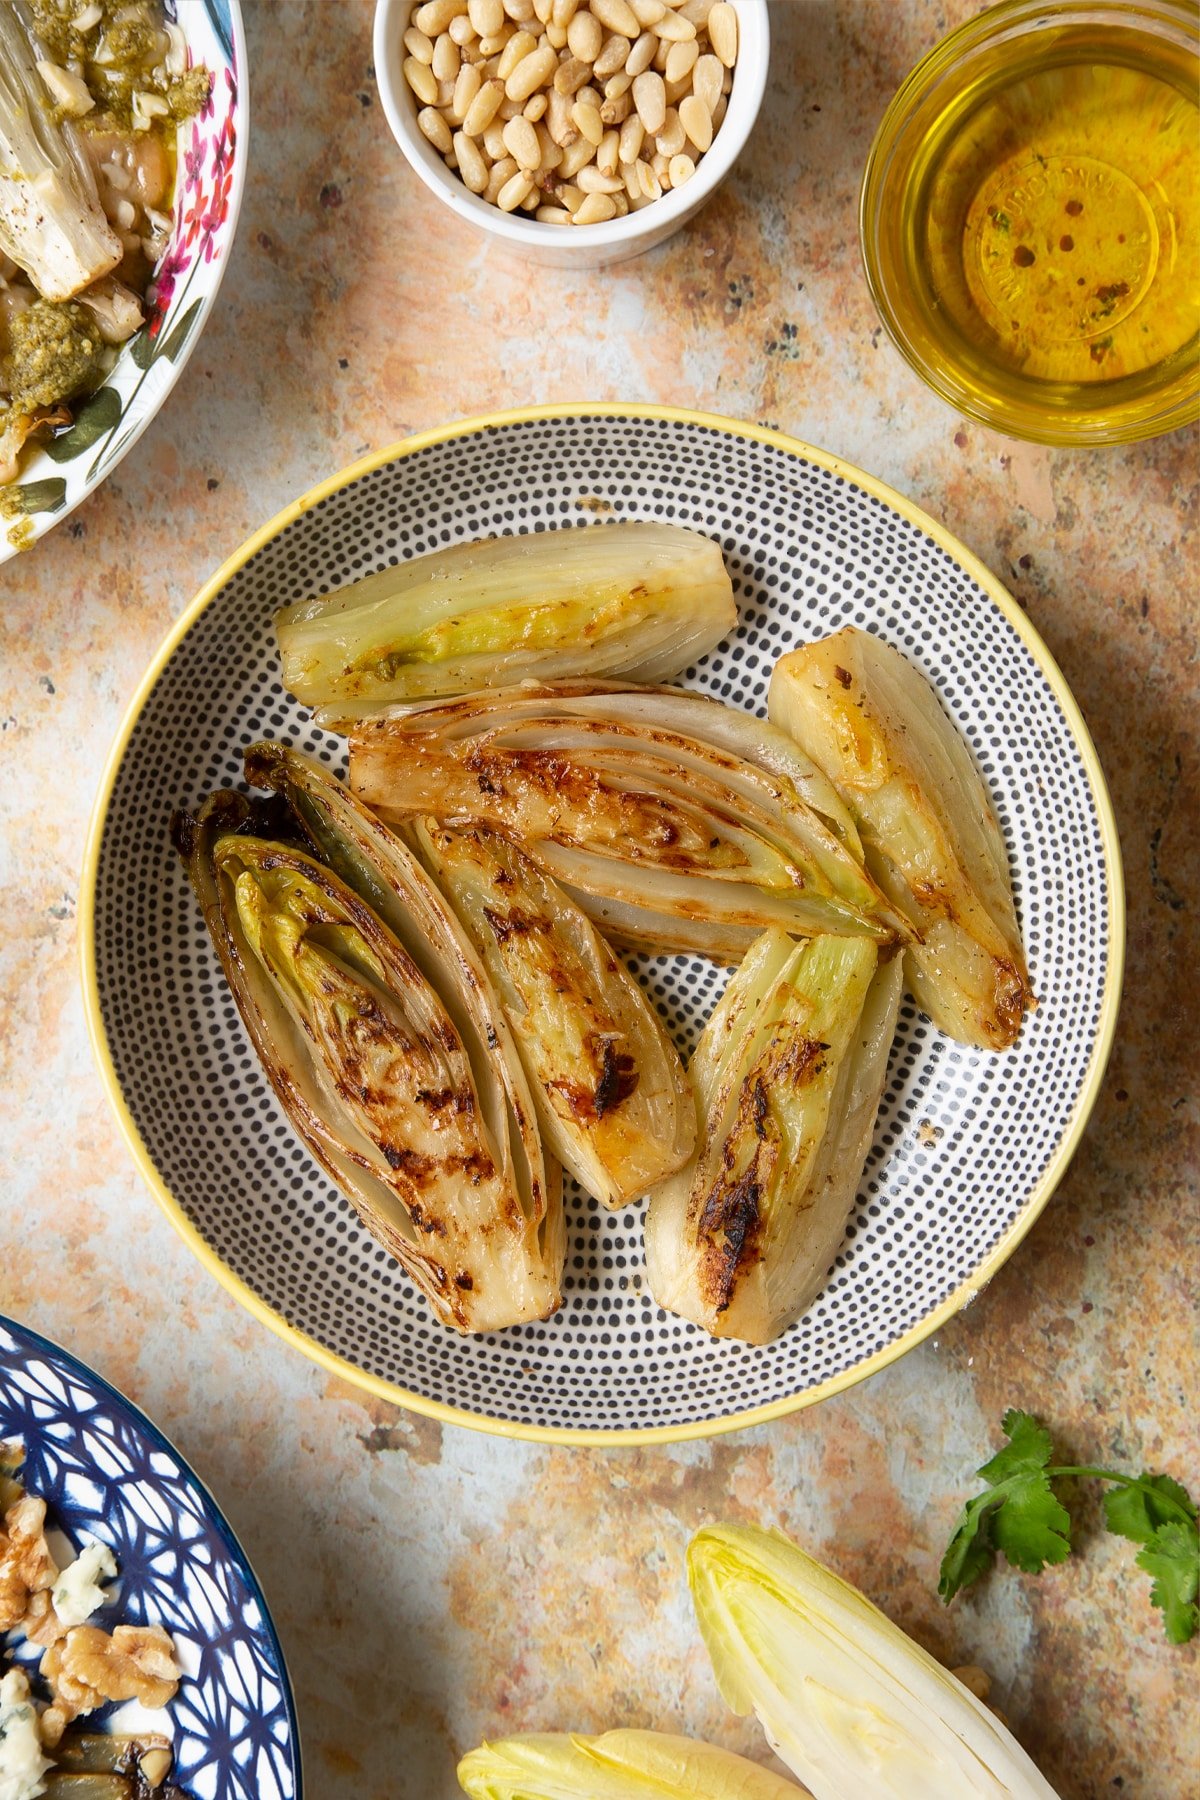 Braised chicory and fennel in a bowl.